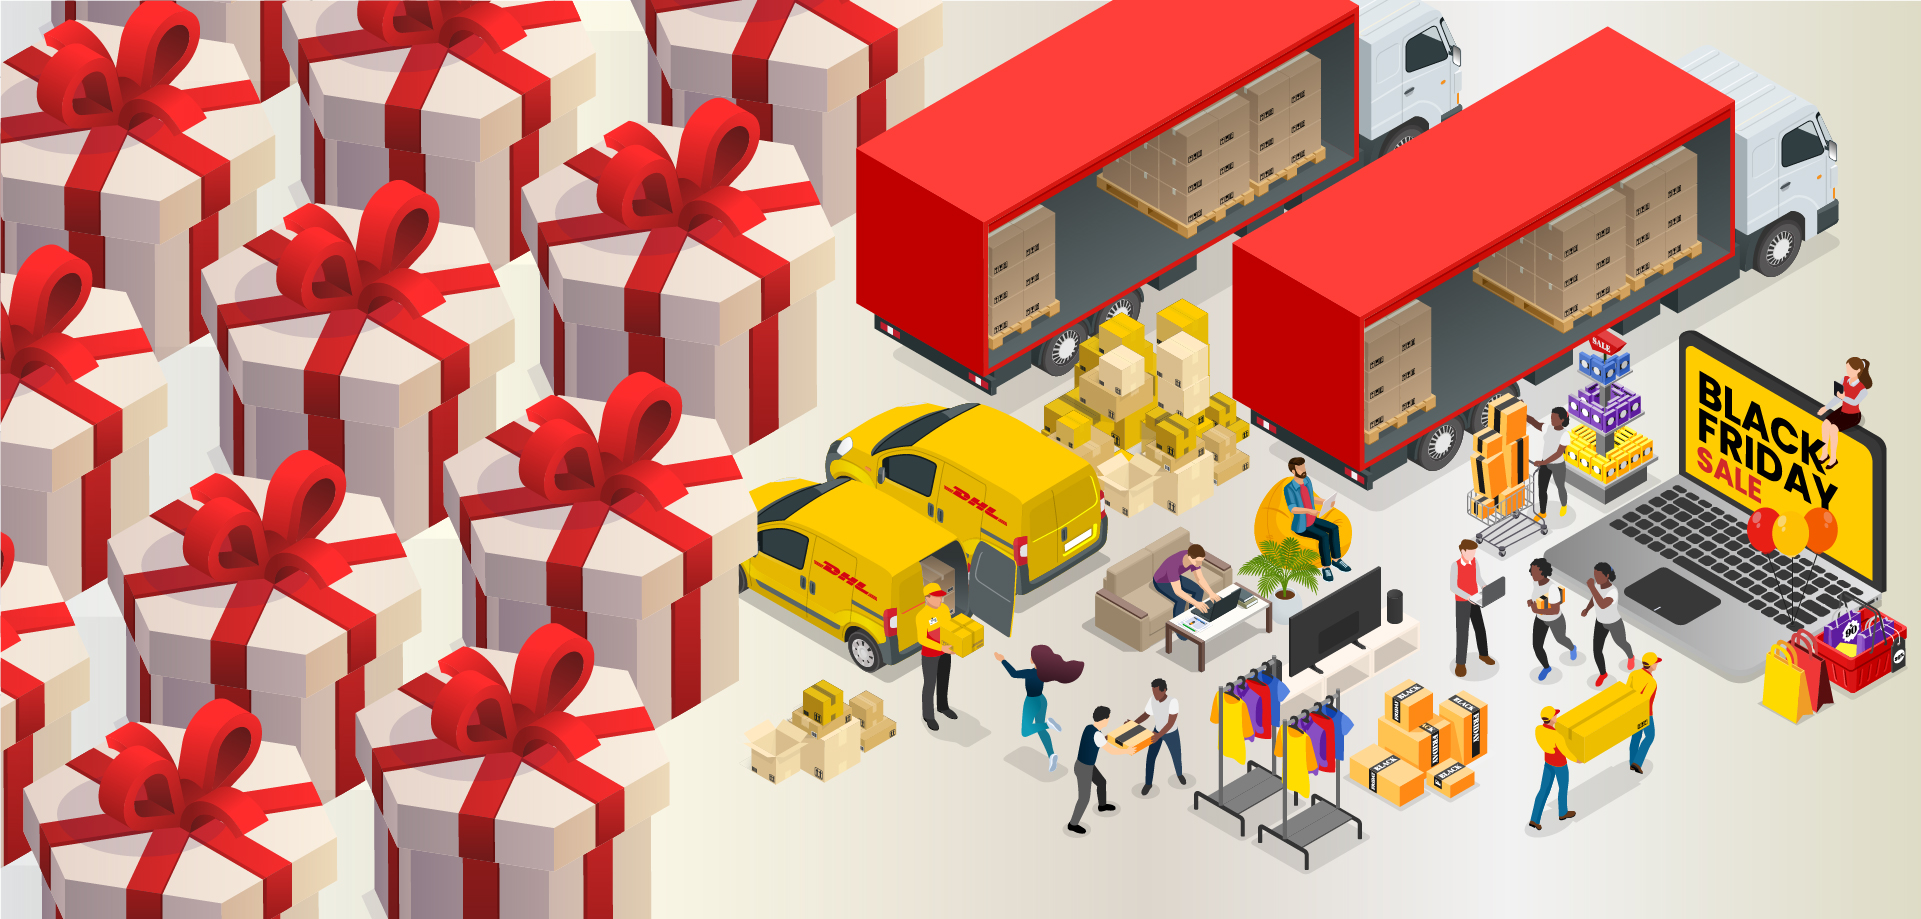 graphic image of presents and DHL delivery items